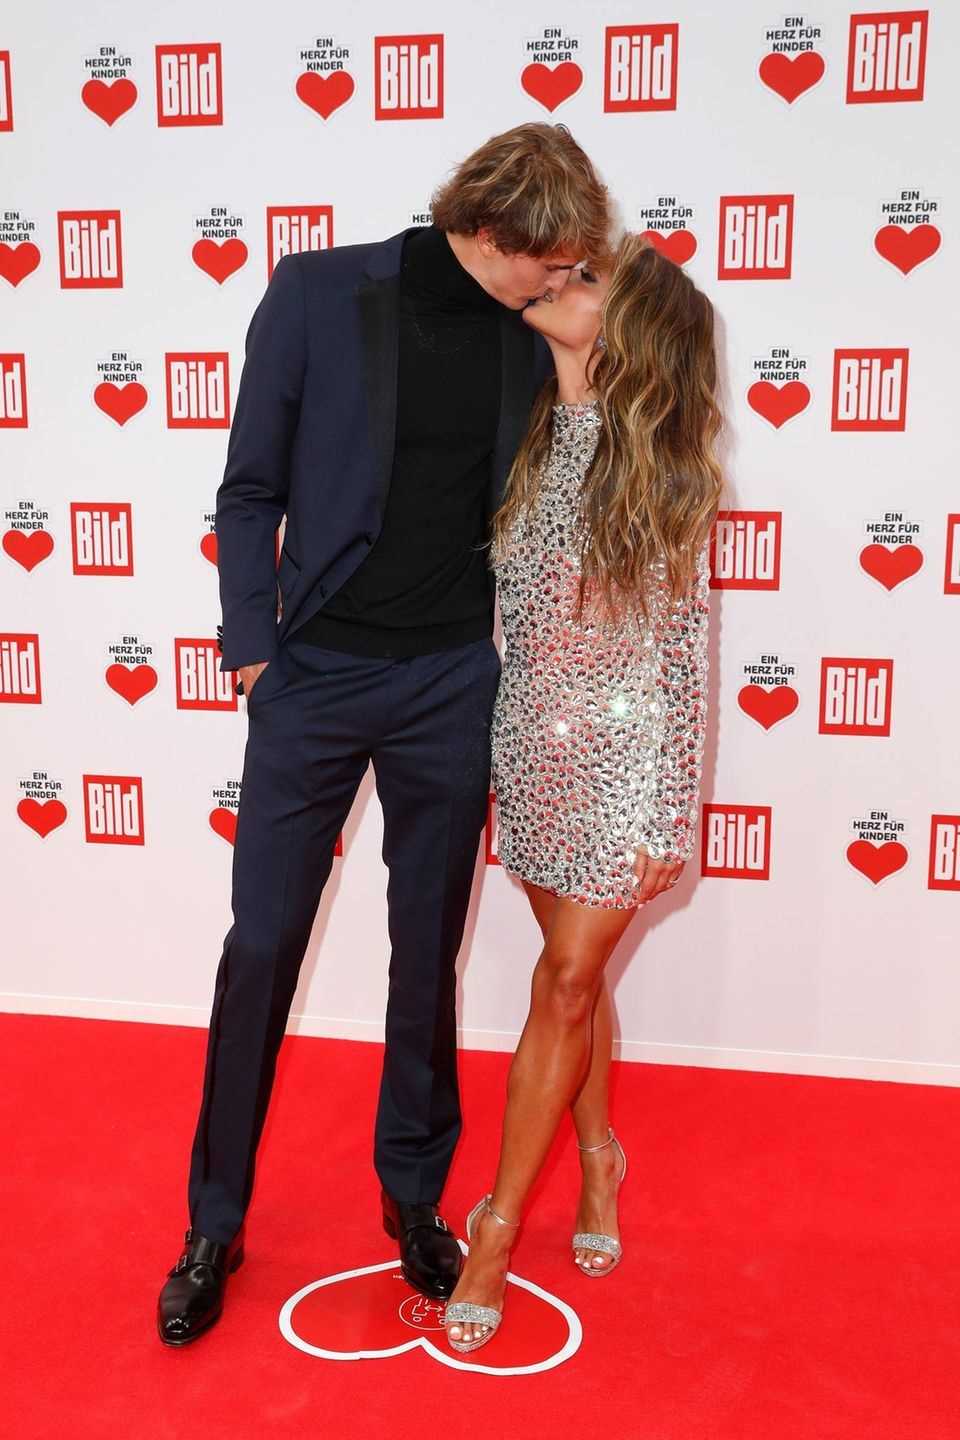 Alexander Zverev and Sophia Thomalla show how in love they are on the red carpet.